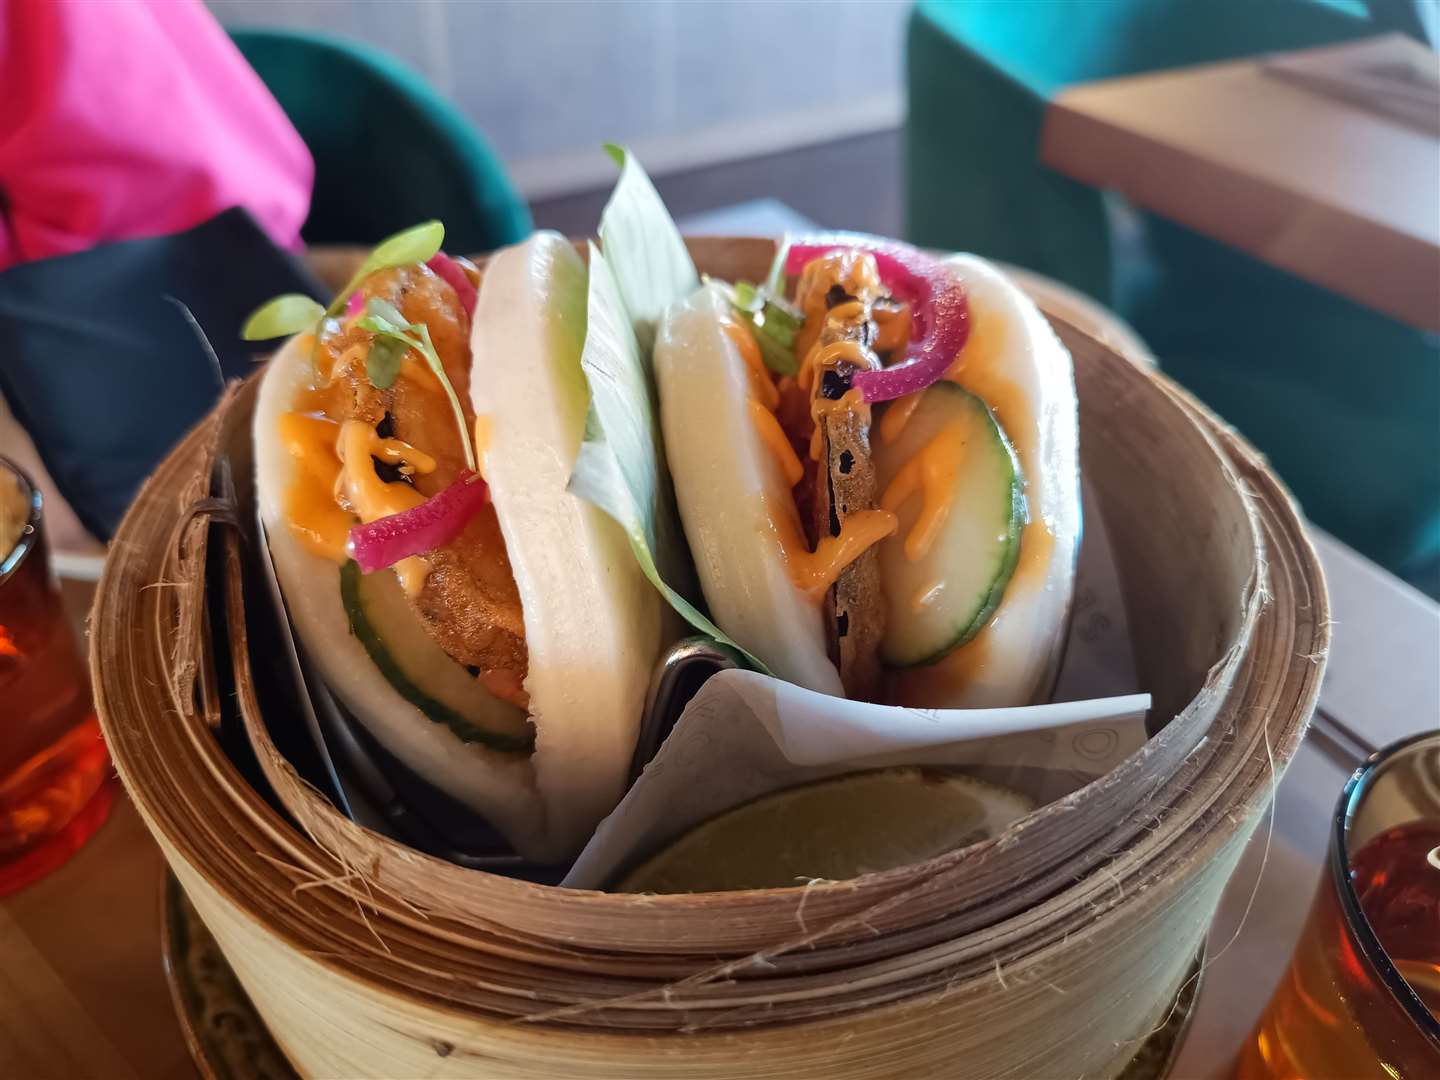 The miso aubergine bao which Grace Dent described as “such poor quality” she feared she was being secretly filmed by TikTok pranksters